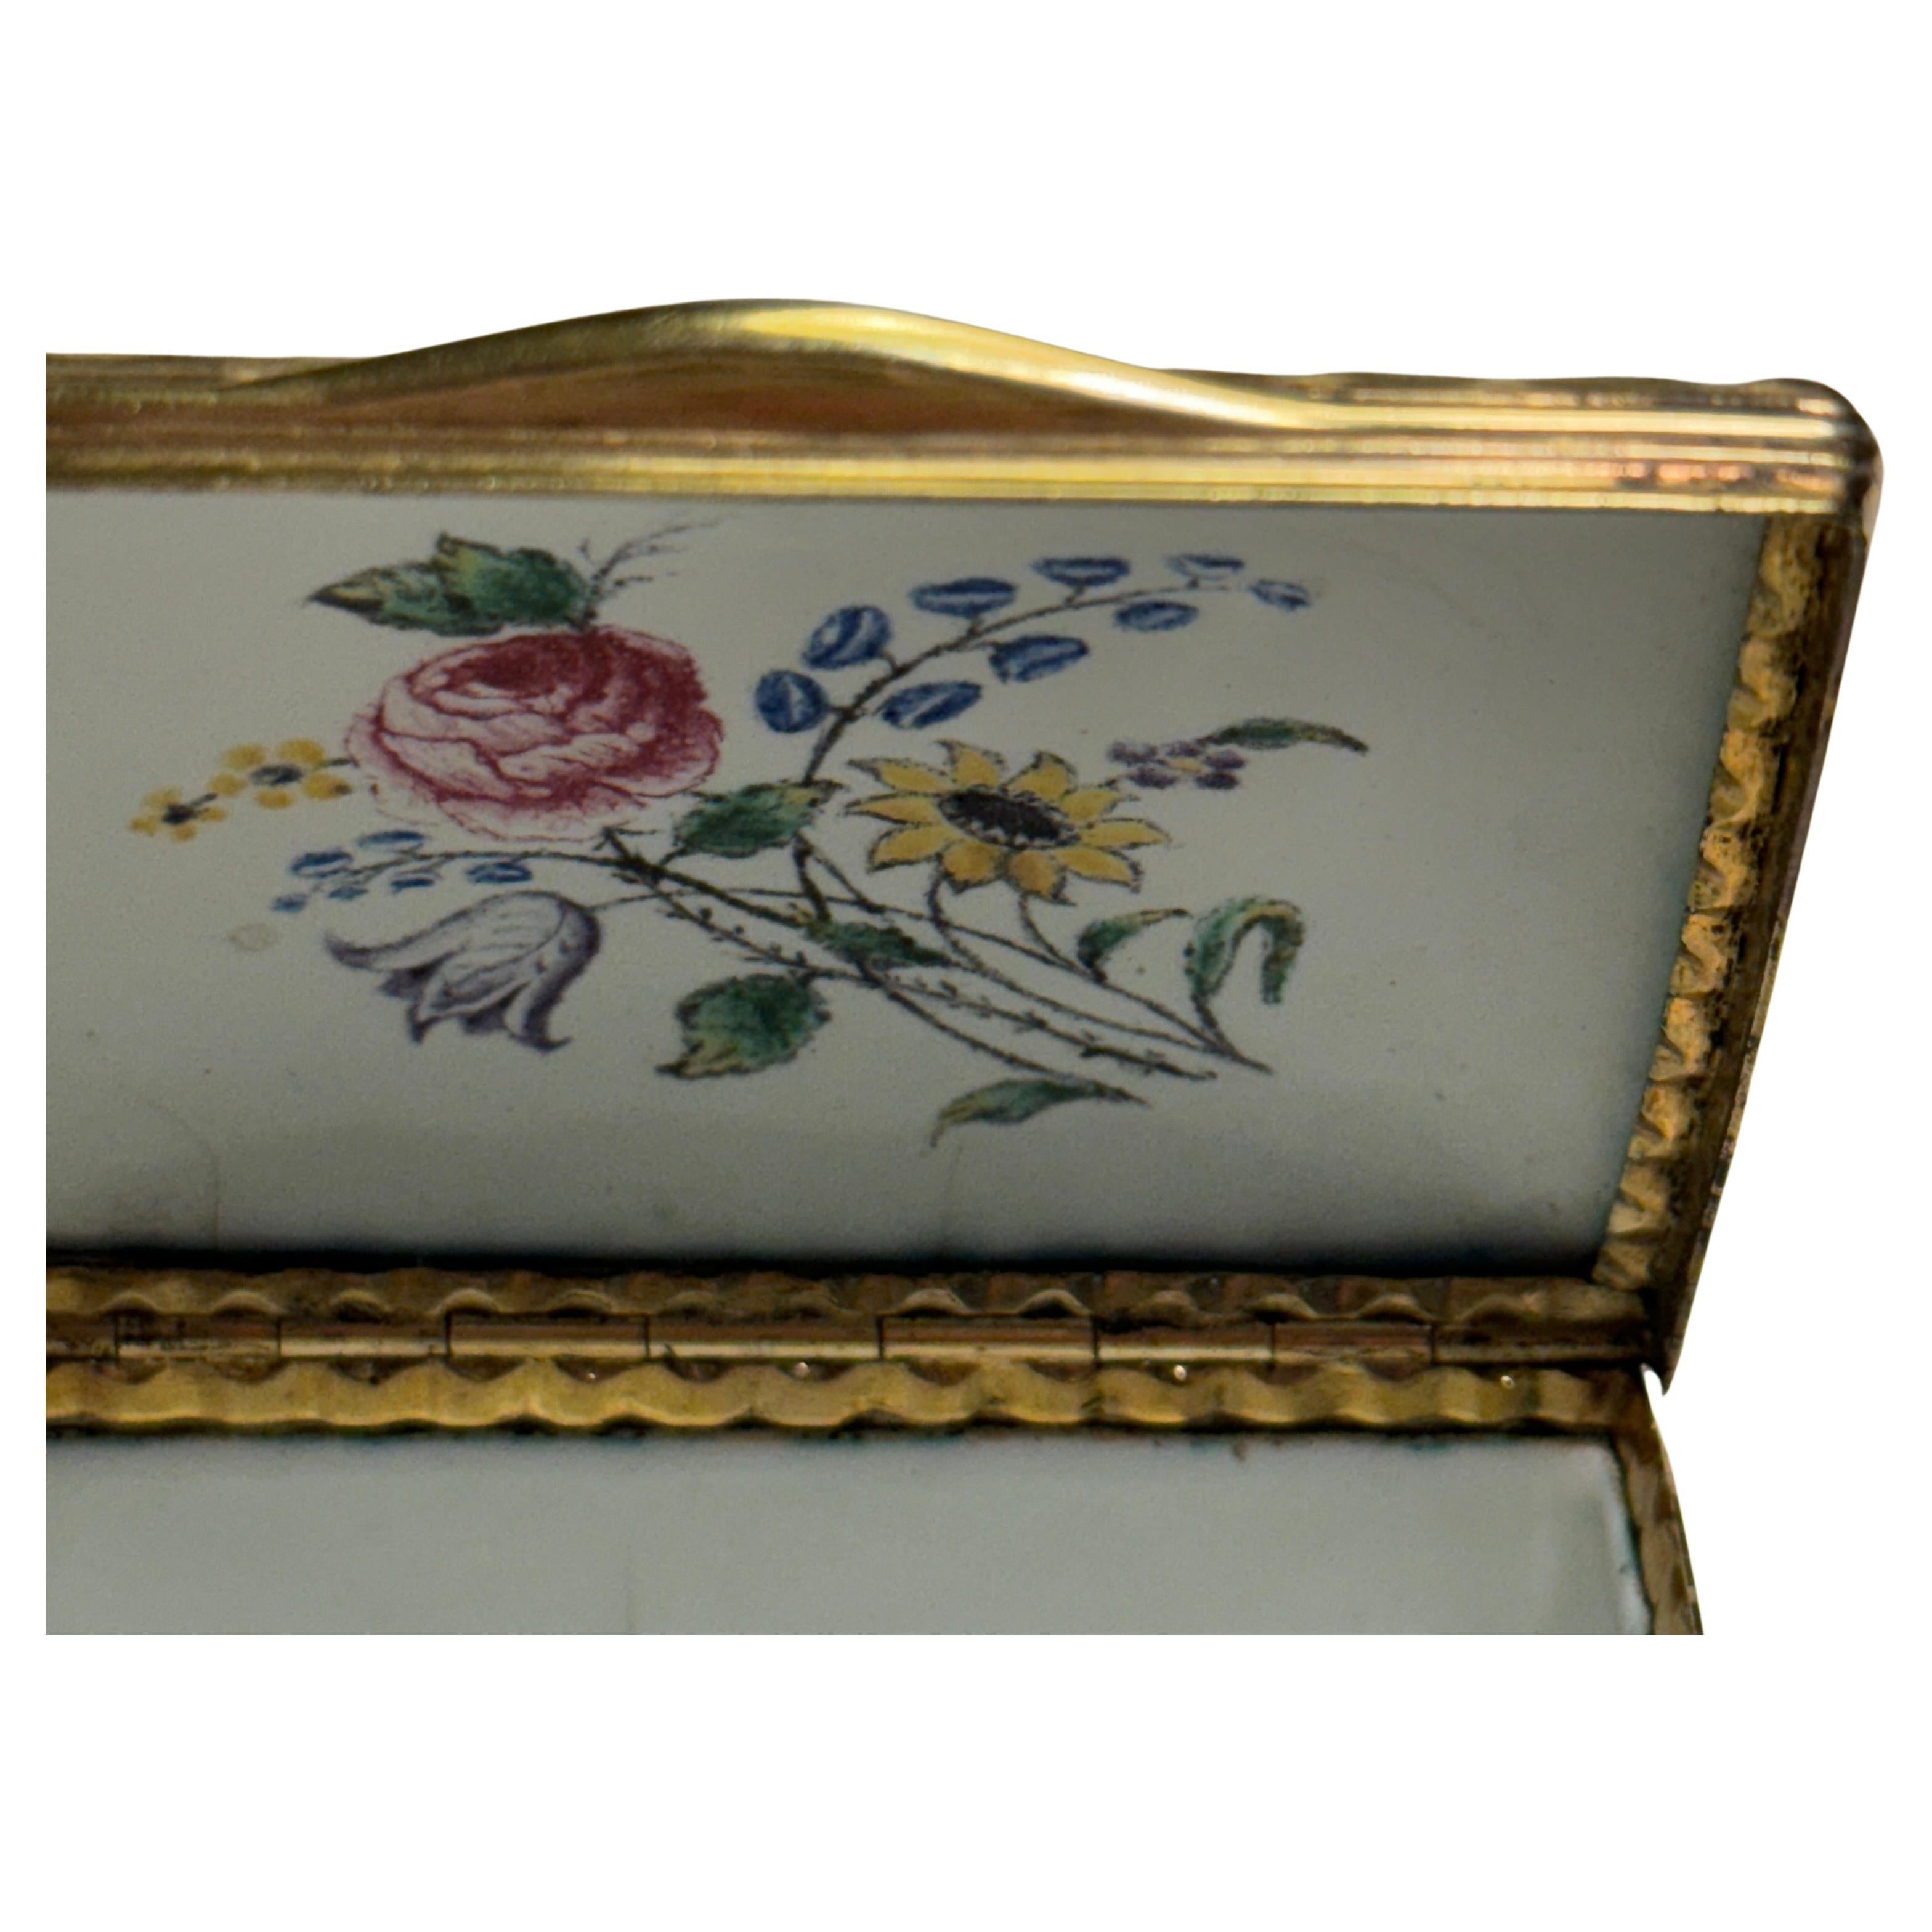 18th Century Porcelain Snuff Tobacco Box with Ormulu Gilt Decorations In Good Condition For Sale In Haddonfield, NJ